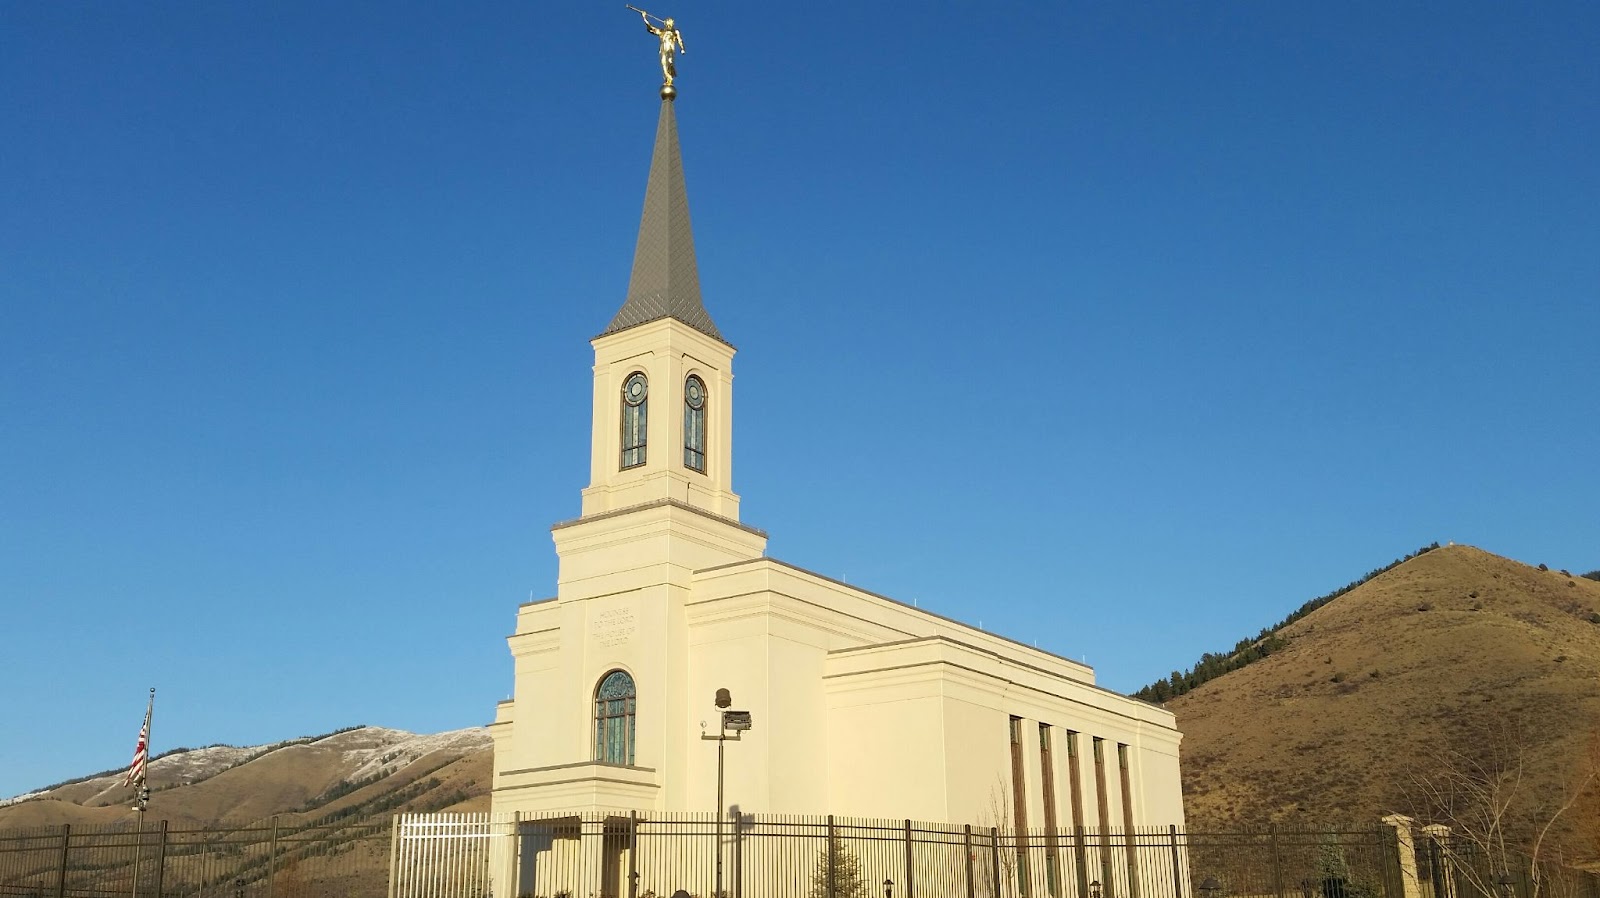 If you are visiting Rock Springs, you must visit The Church of Latter-Day Saints.